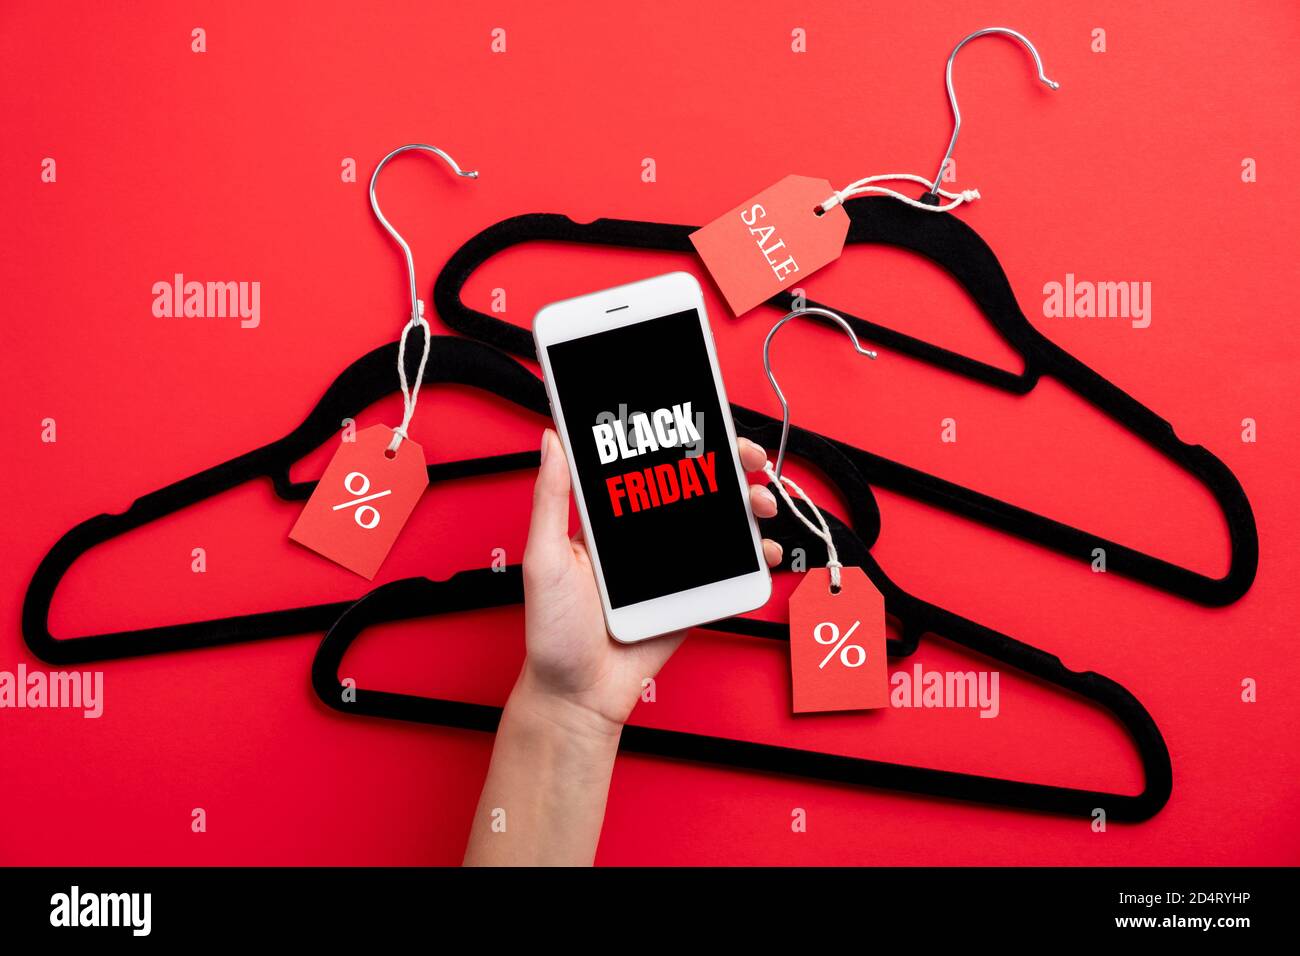 Female hand holding phone with sign 'Black Friday' on screen over coat hangers on red background. Black Friday web shopping, coupon, discount concept. Stock Photo